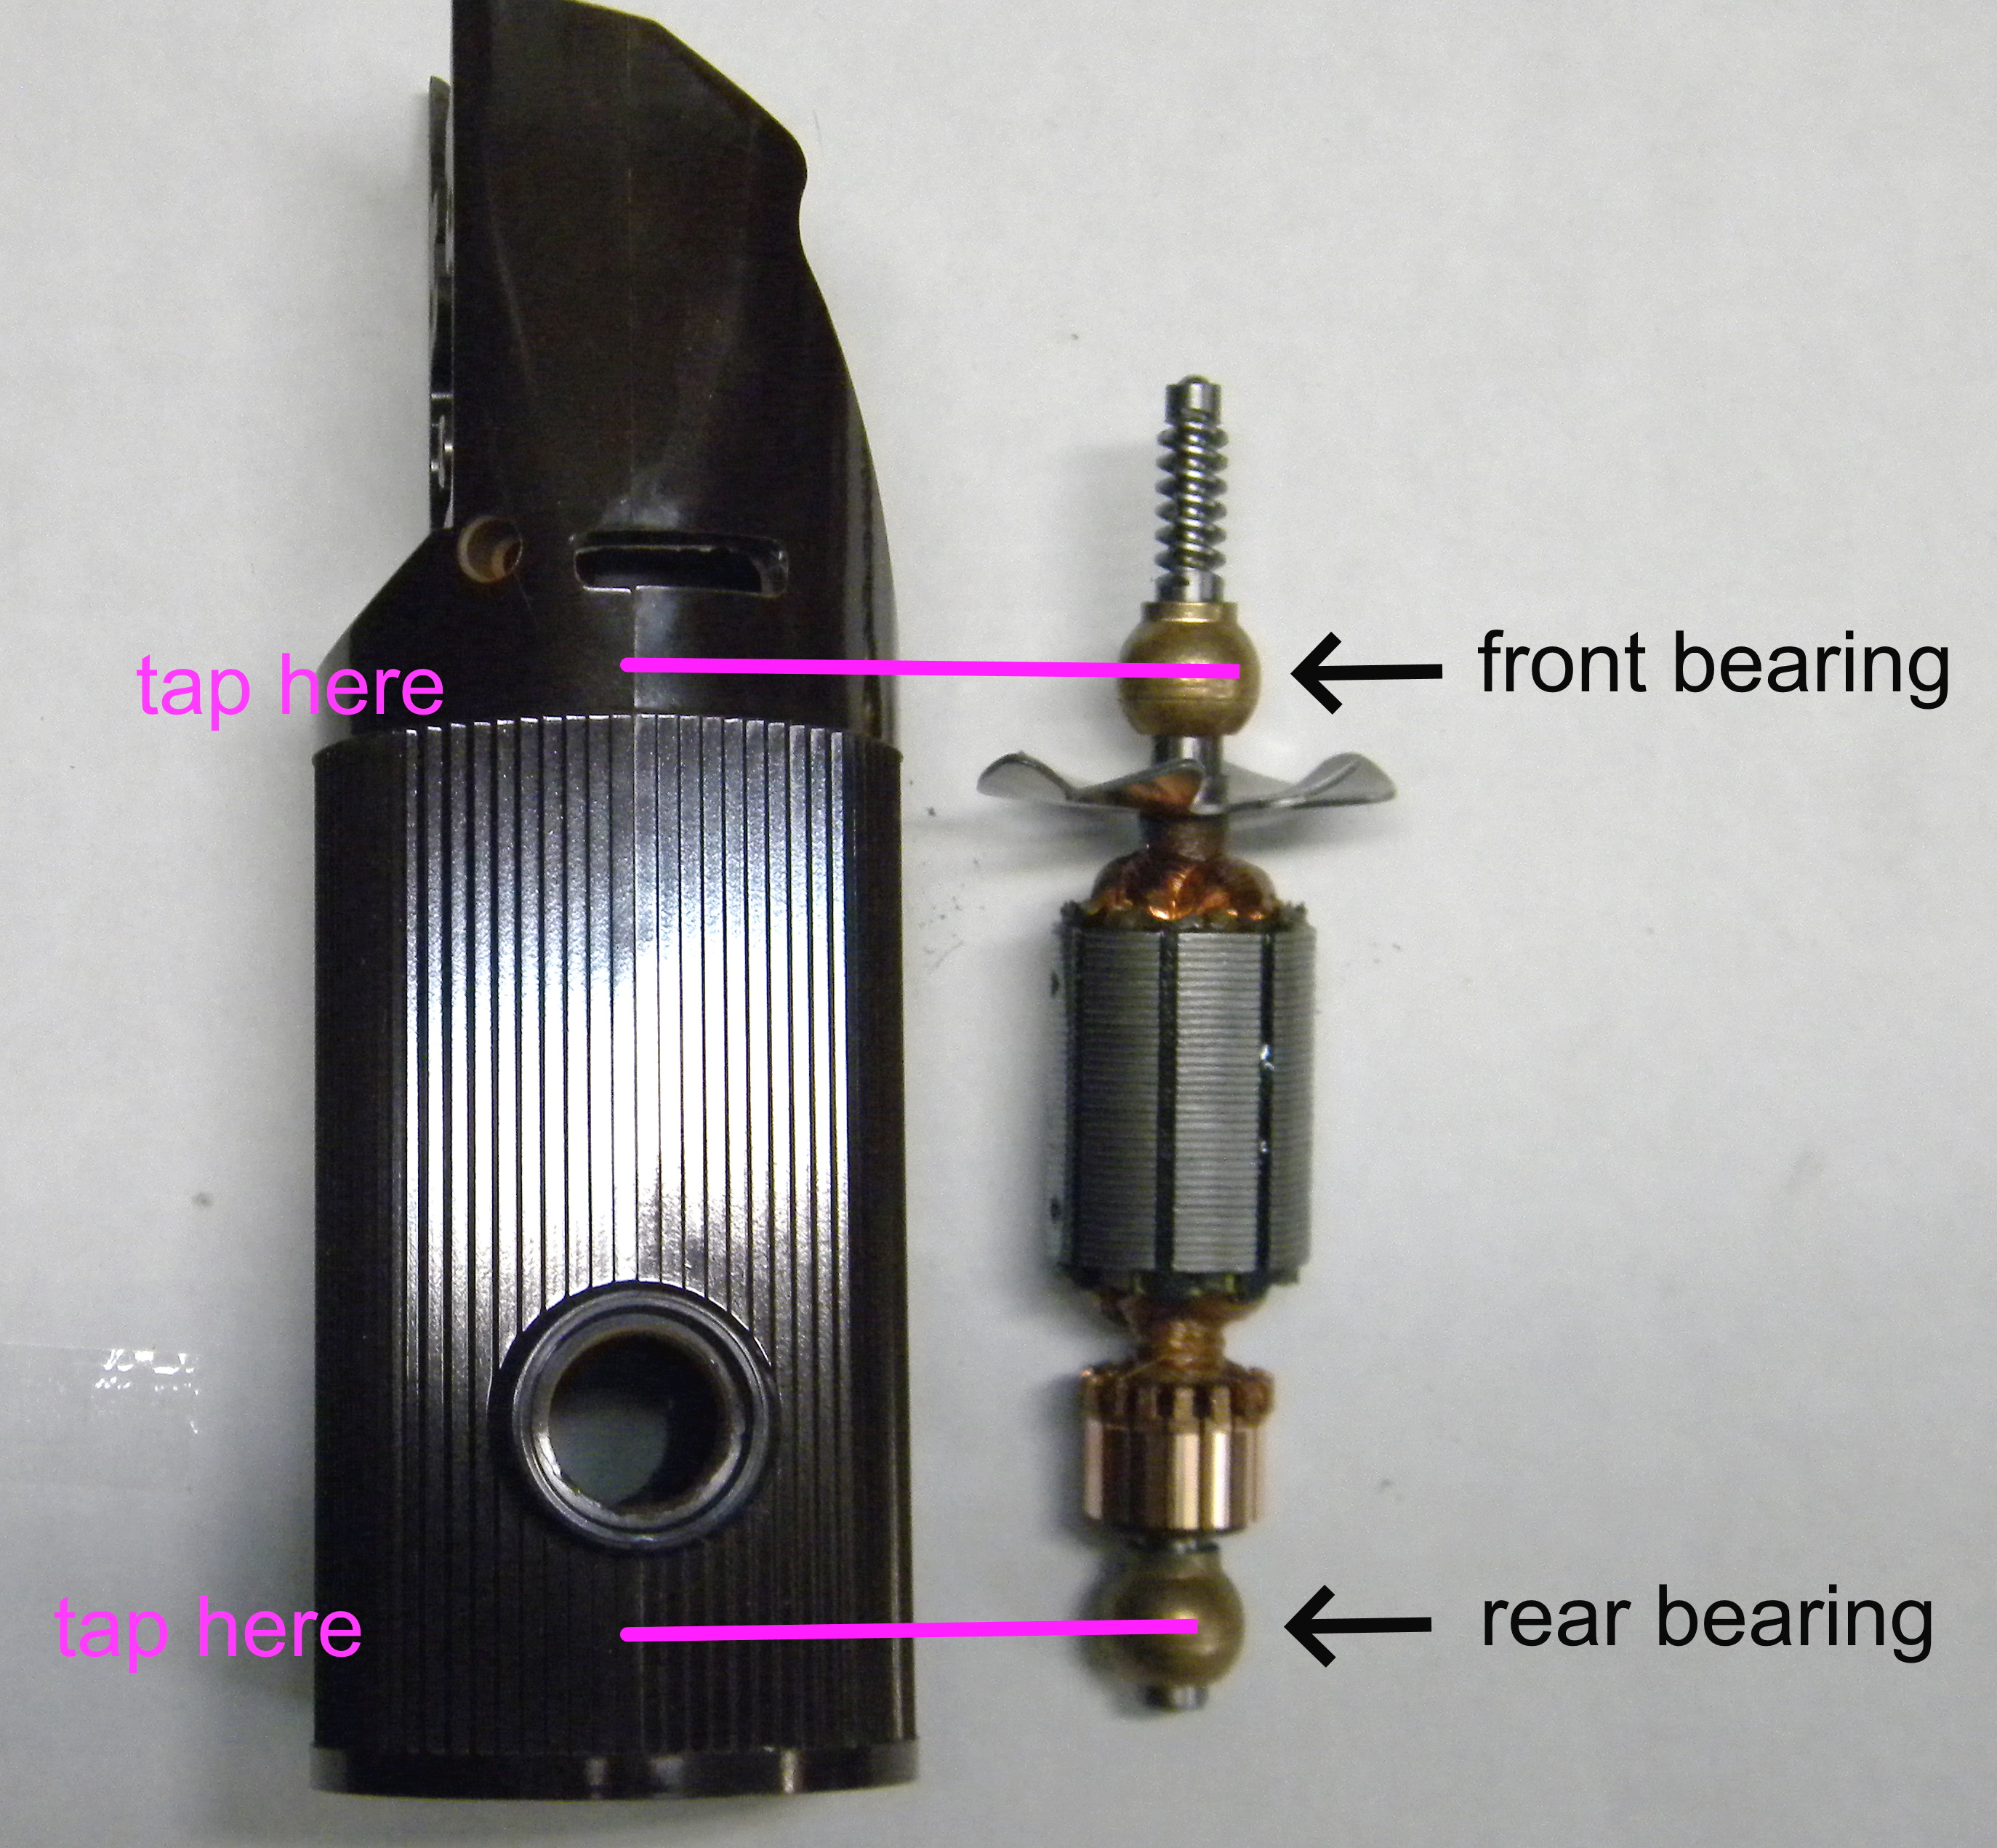 Placement of Oster bearing in an A5 clipper